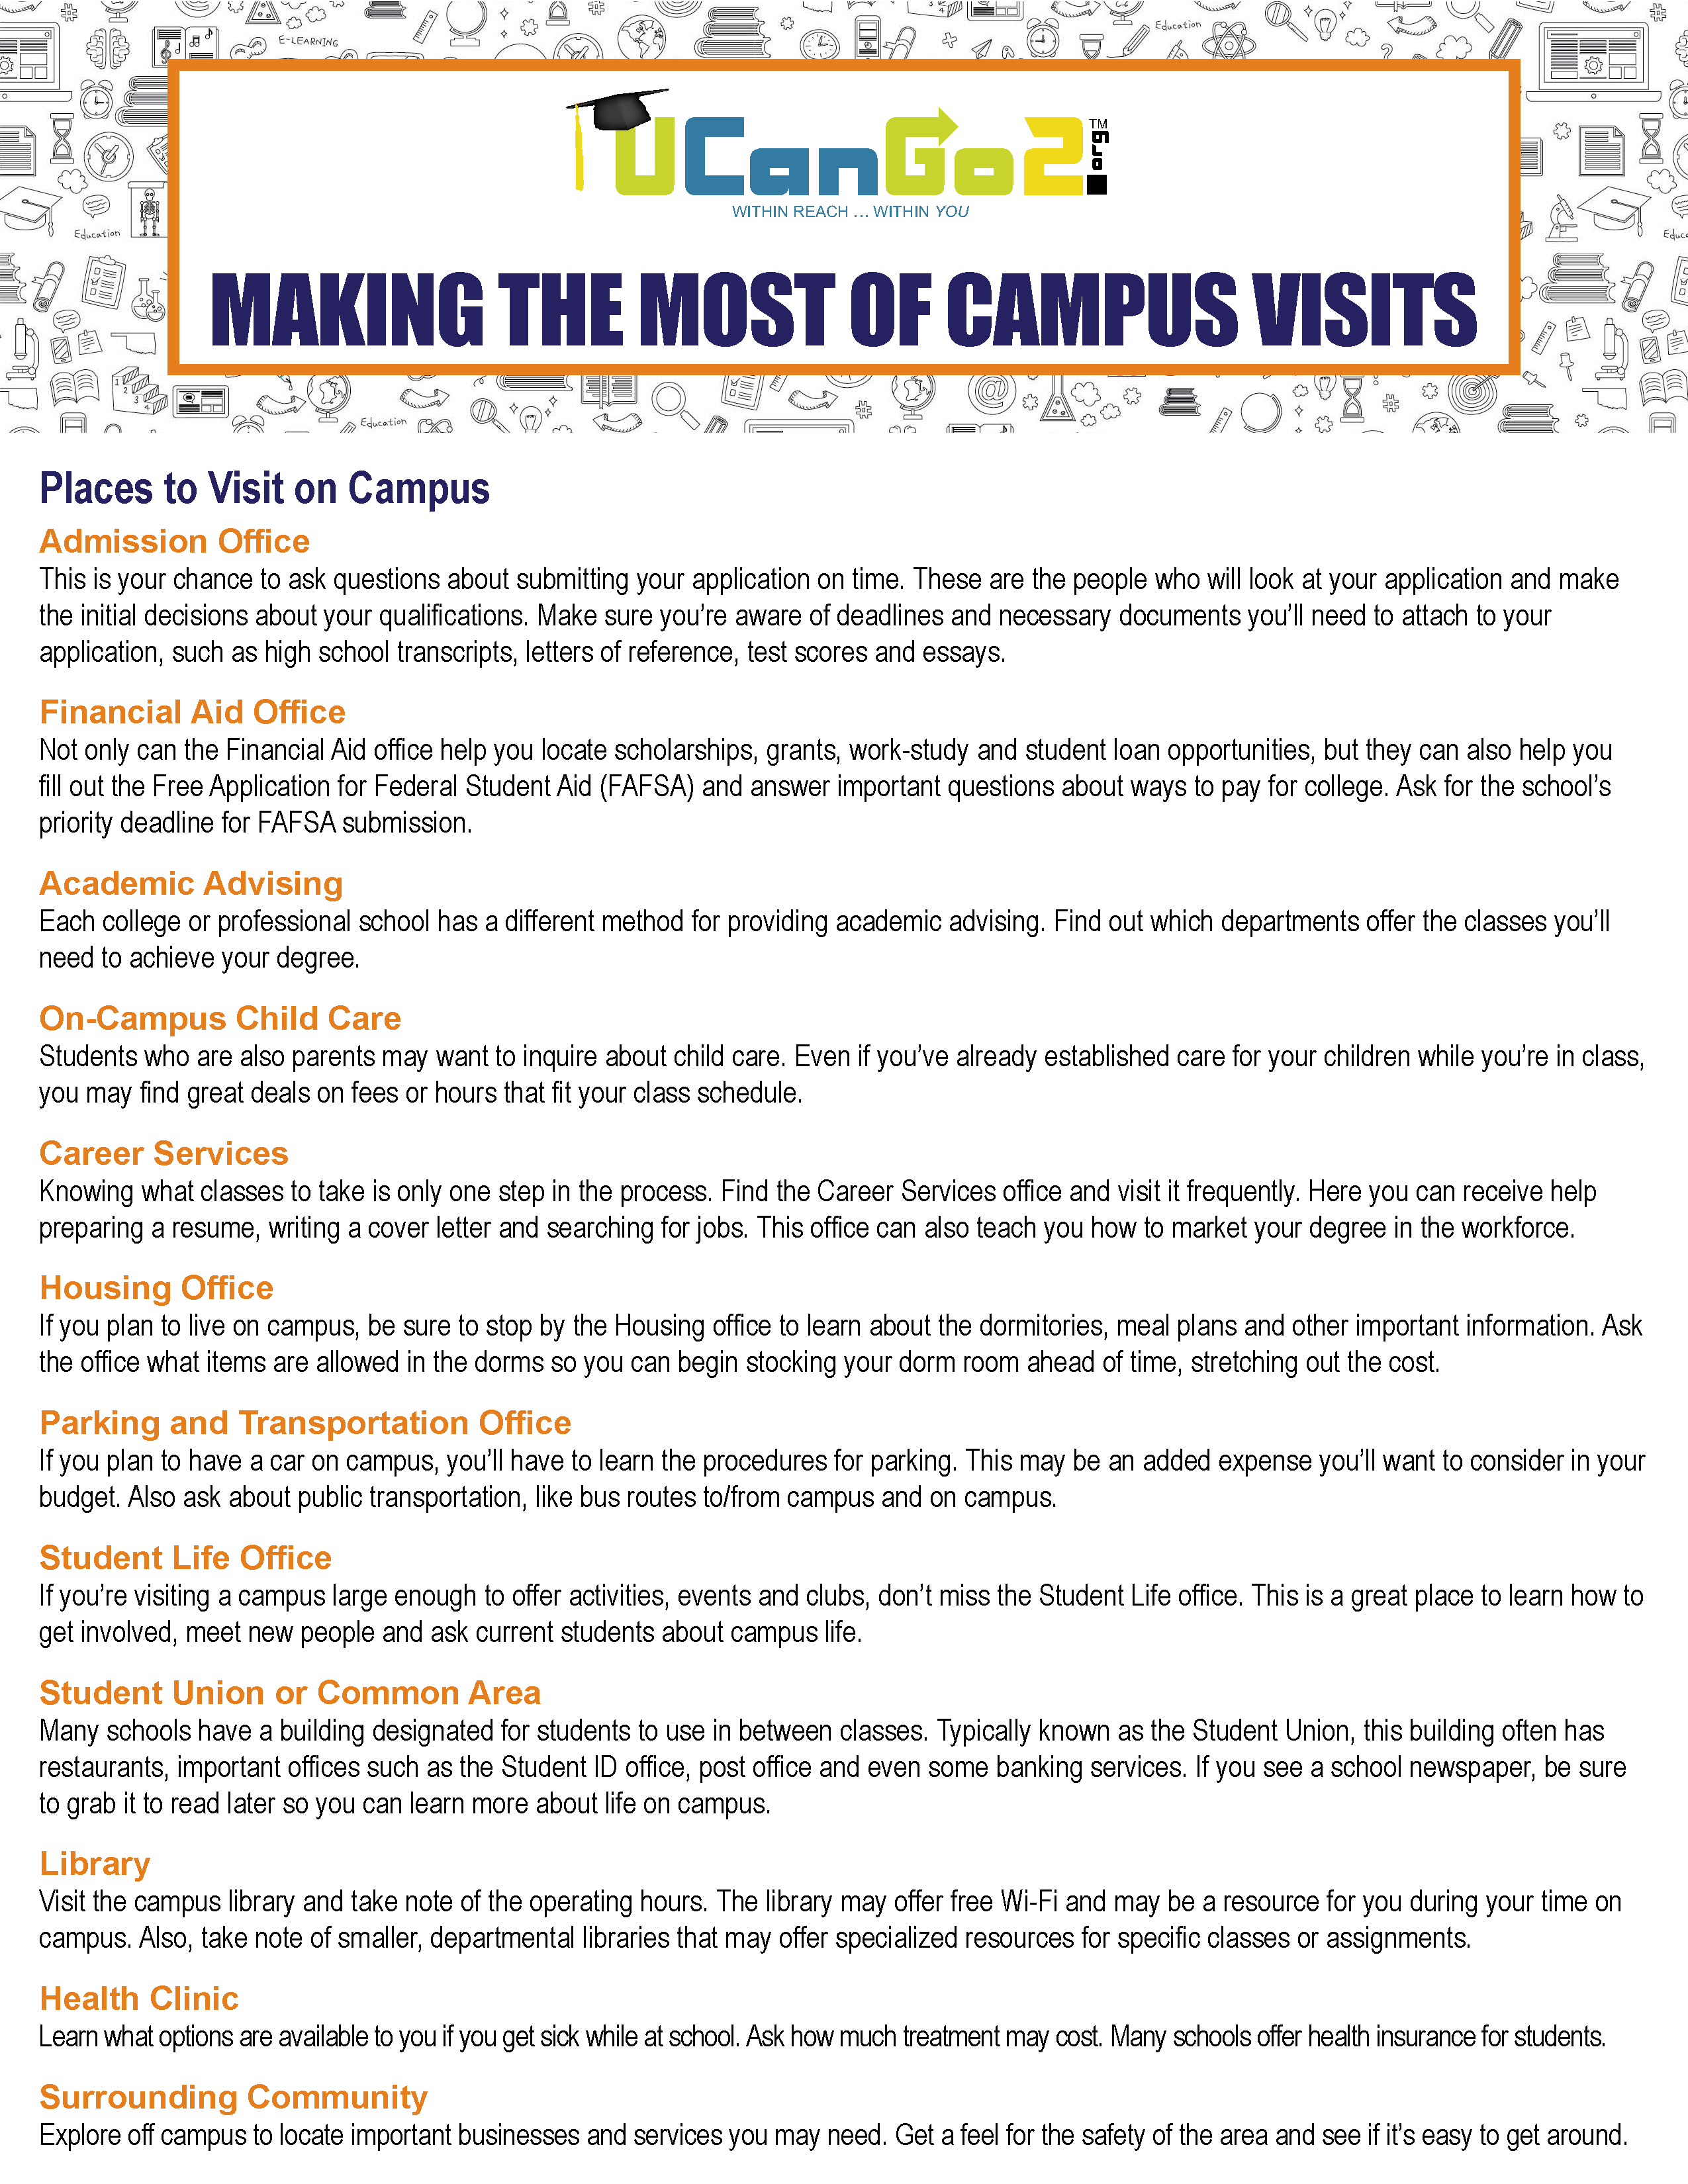 PDF of Making the Most of Campus Visits 